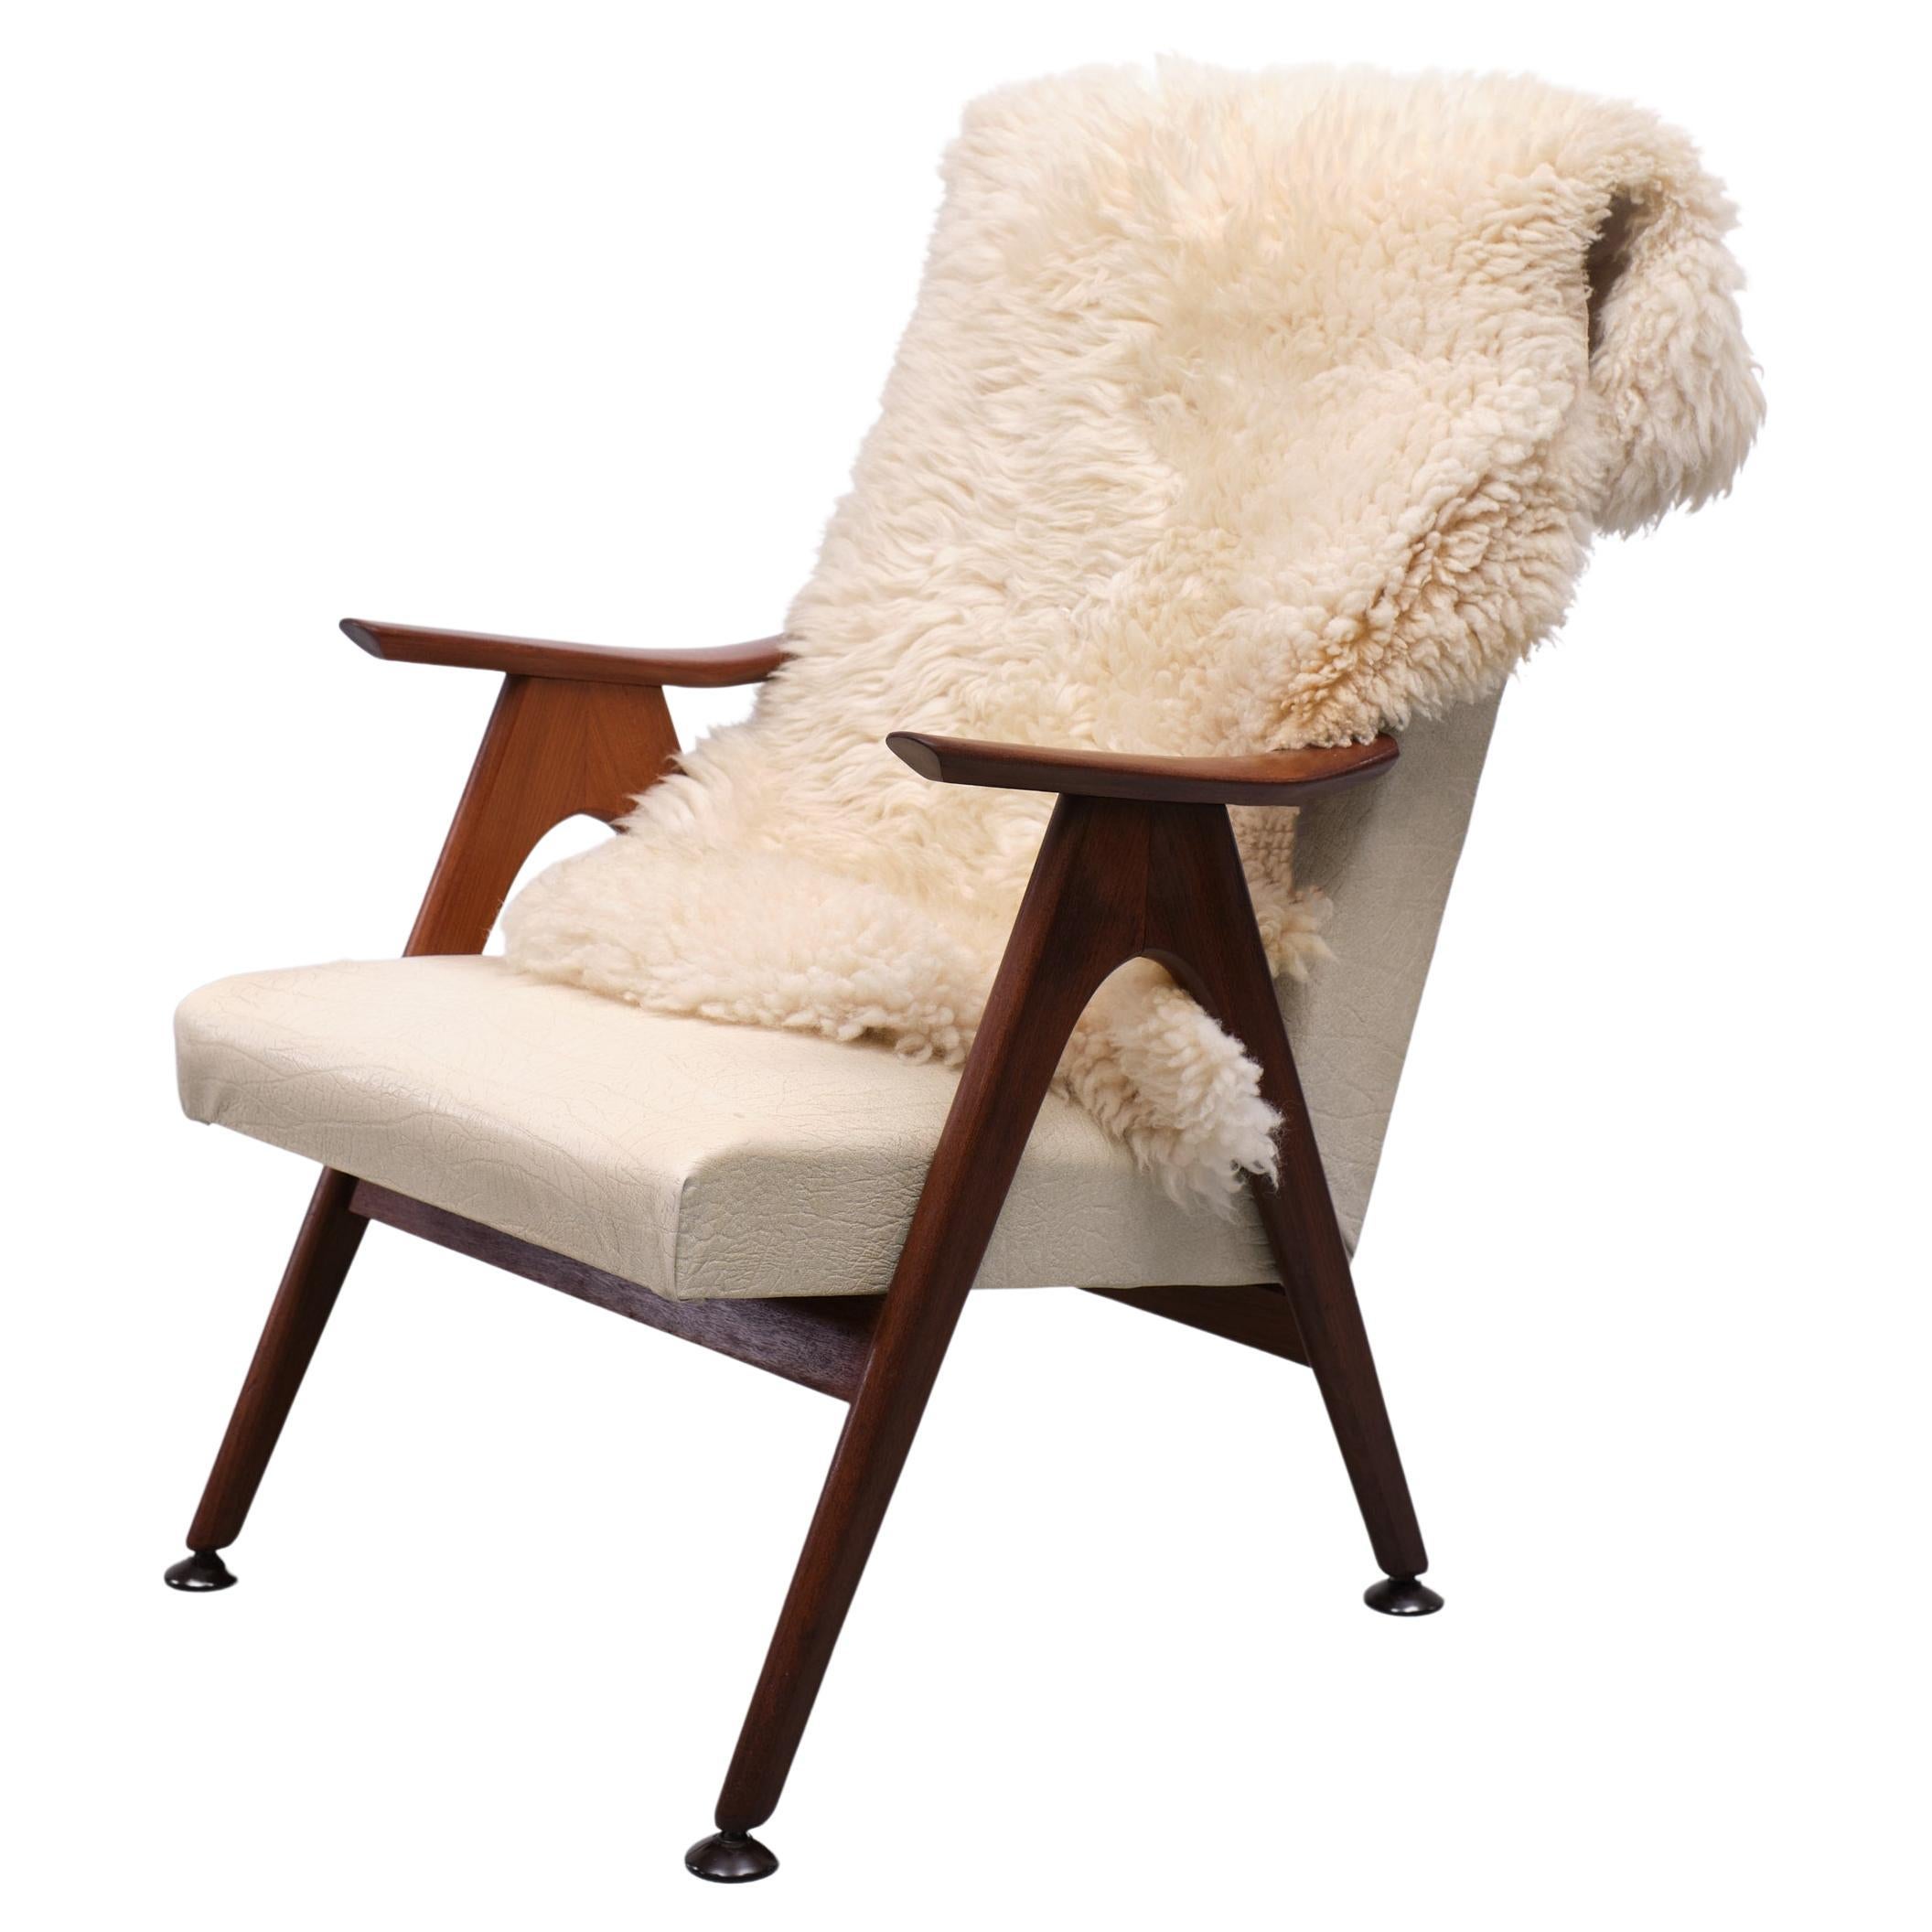 Very nice Teak lounge chair comes with a off White faux Leather upholstery. 
Design by well known Dutch designer Louis van Teeffelen. Recognizable for its organic 
furniture. Good condition.